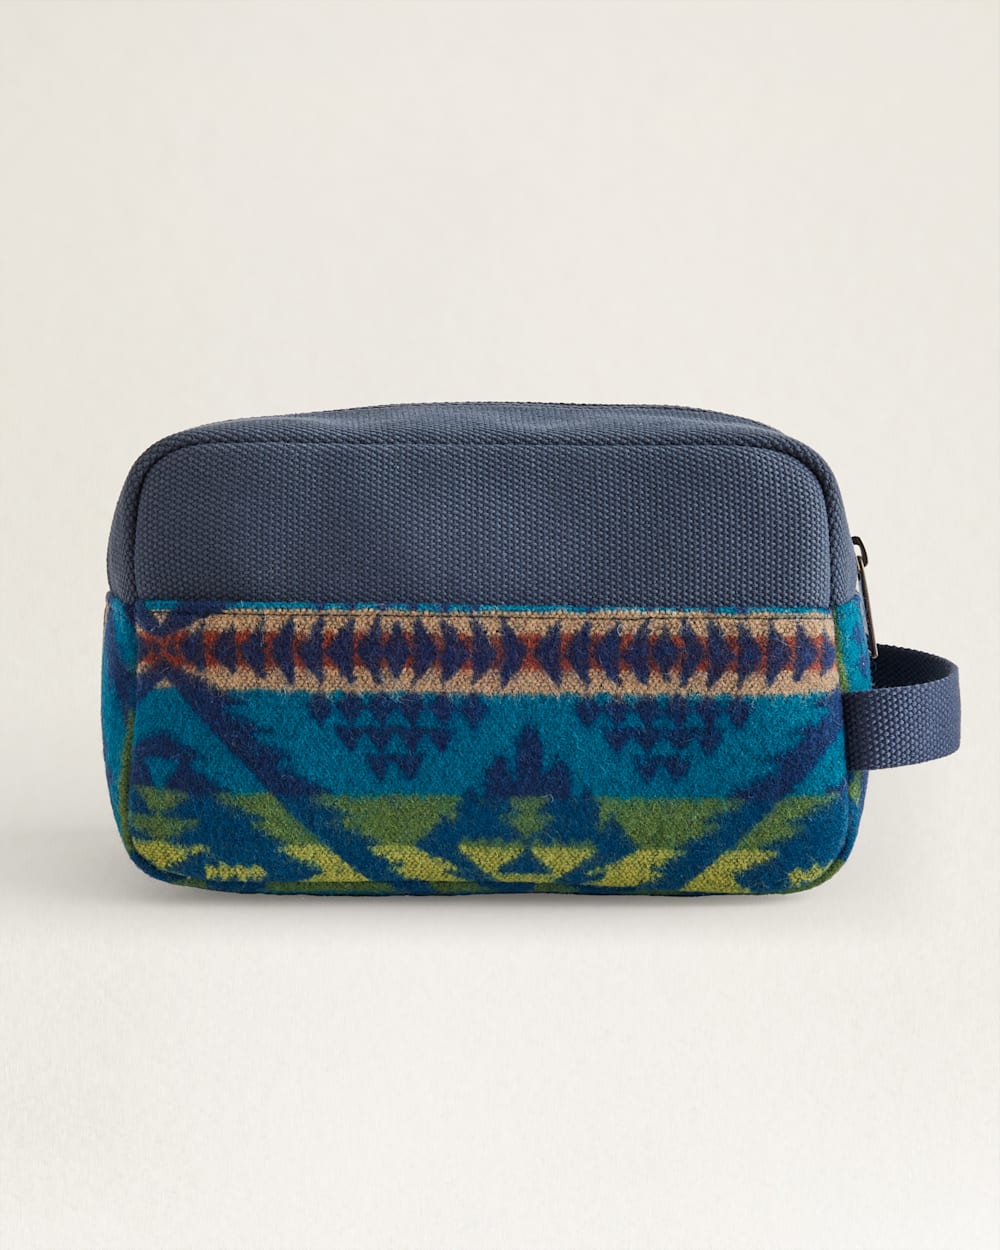 ALTERNATE VIEW OF DIAMOND DESERT CARRYALL POUCH IN BLUE MULTI image number 3